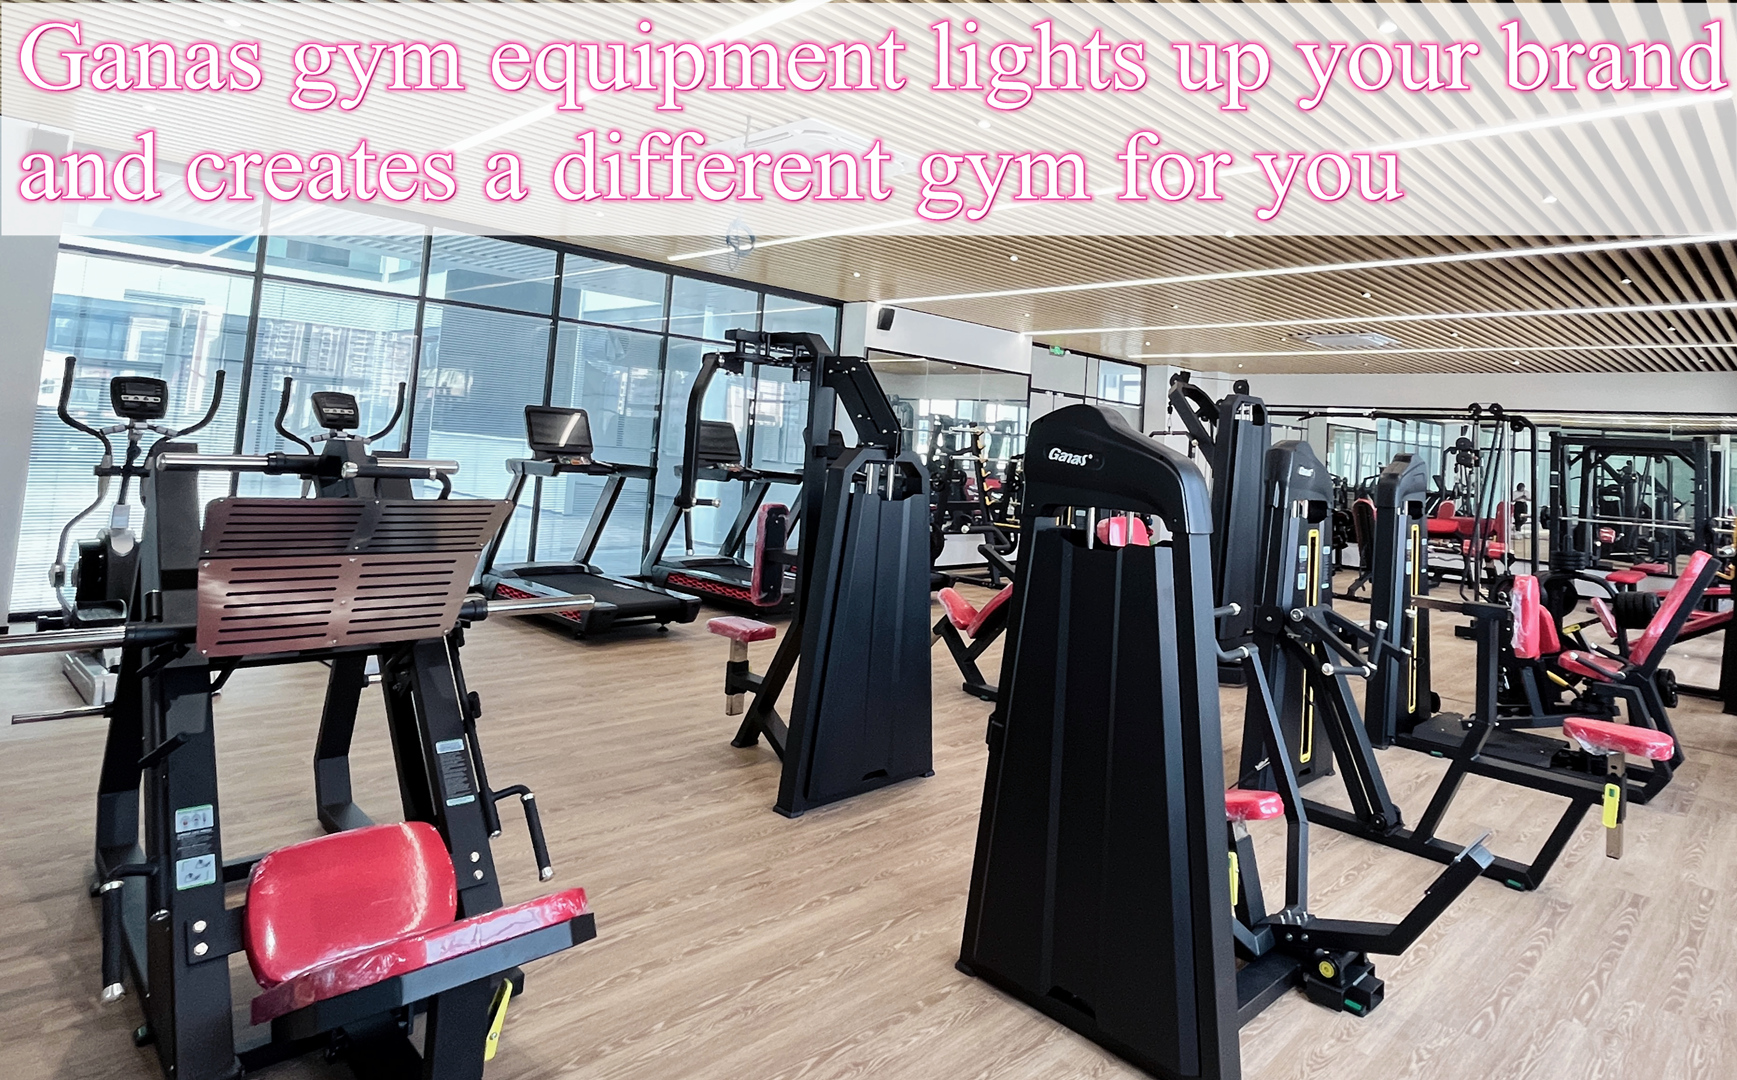 Ganas gym equipment lights up your brand and creates a different gym for you